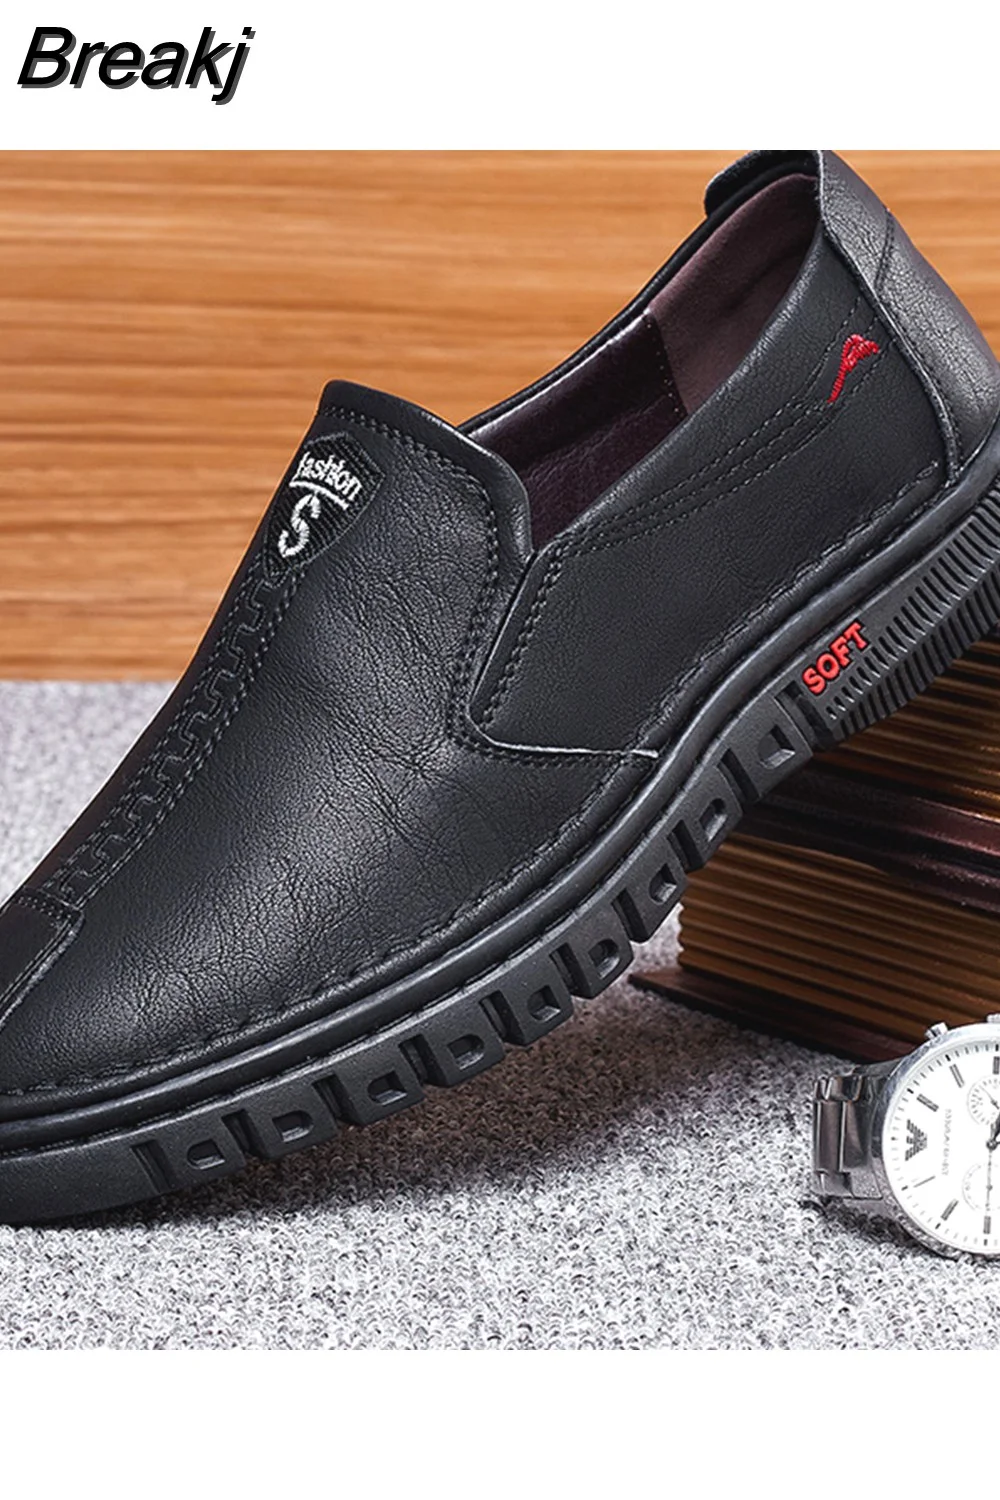 Breakj Men's Genuine Leather Shoes Summer Breathable Slip on Business Casual Flats Loafers for Men Classic Moccasins Driving Shoes 2023